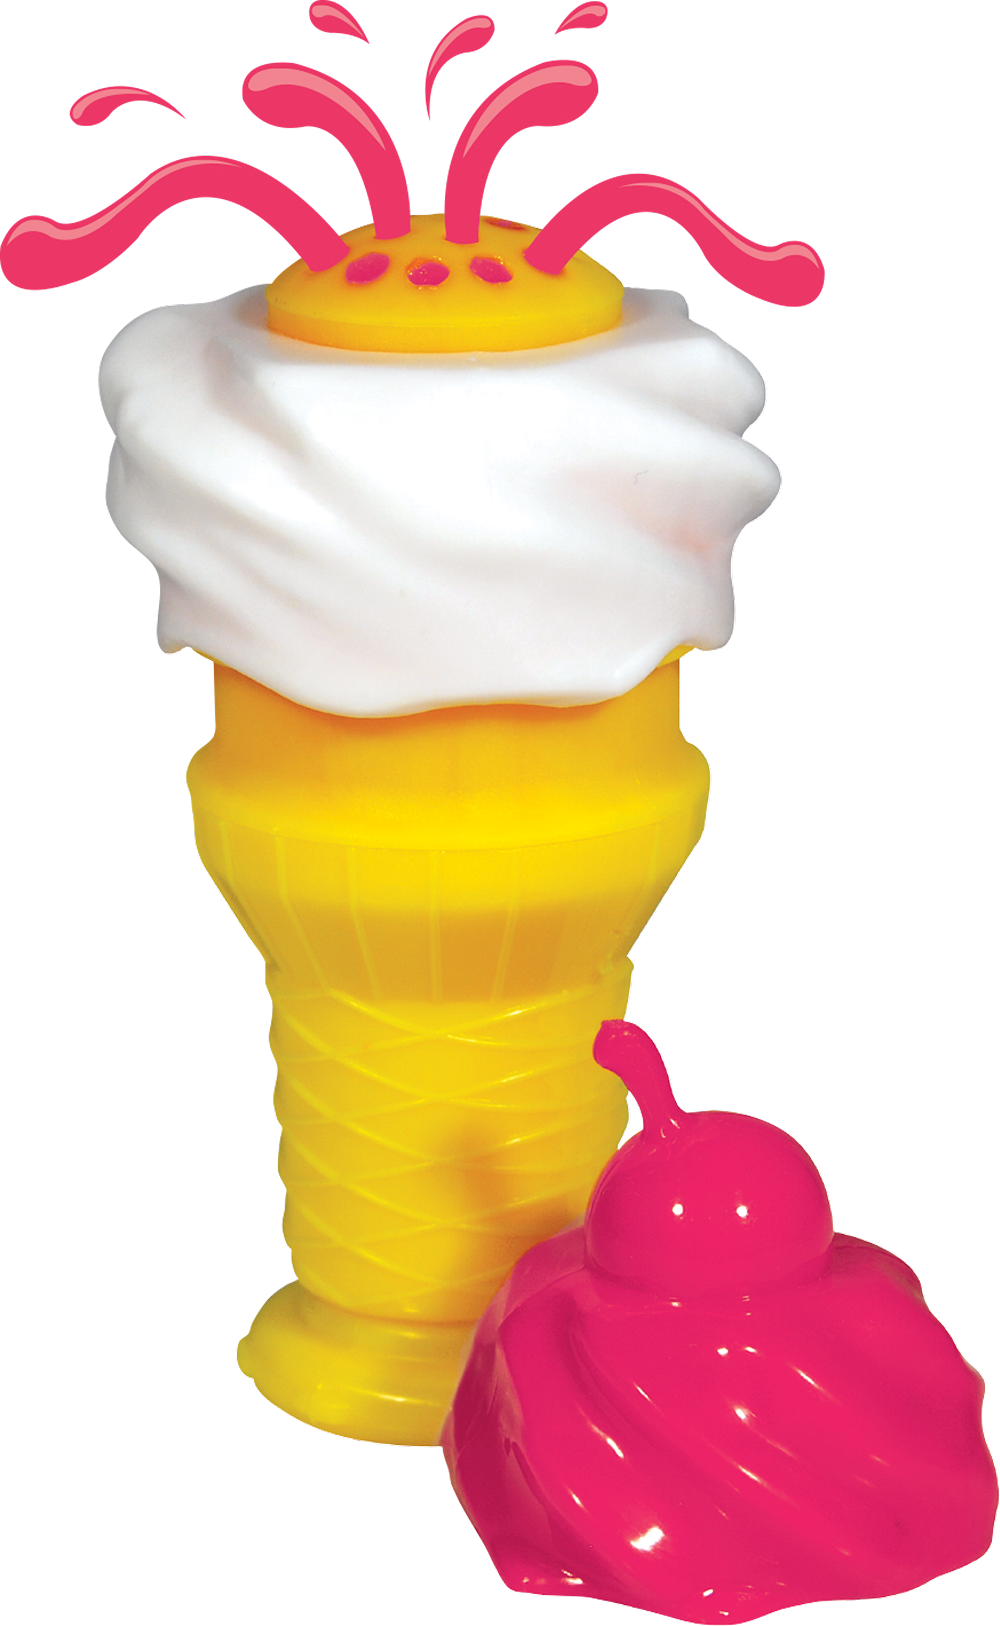 https://exclusivebrands.ca/wp-content/uploads/2022/06/product-novelty-10266-Unit-Candy-Ice-Cream-1.png